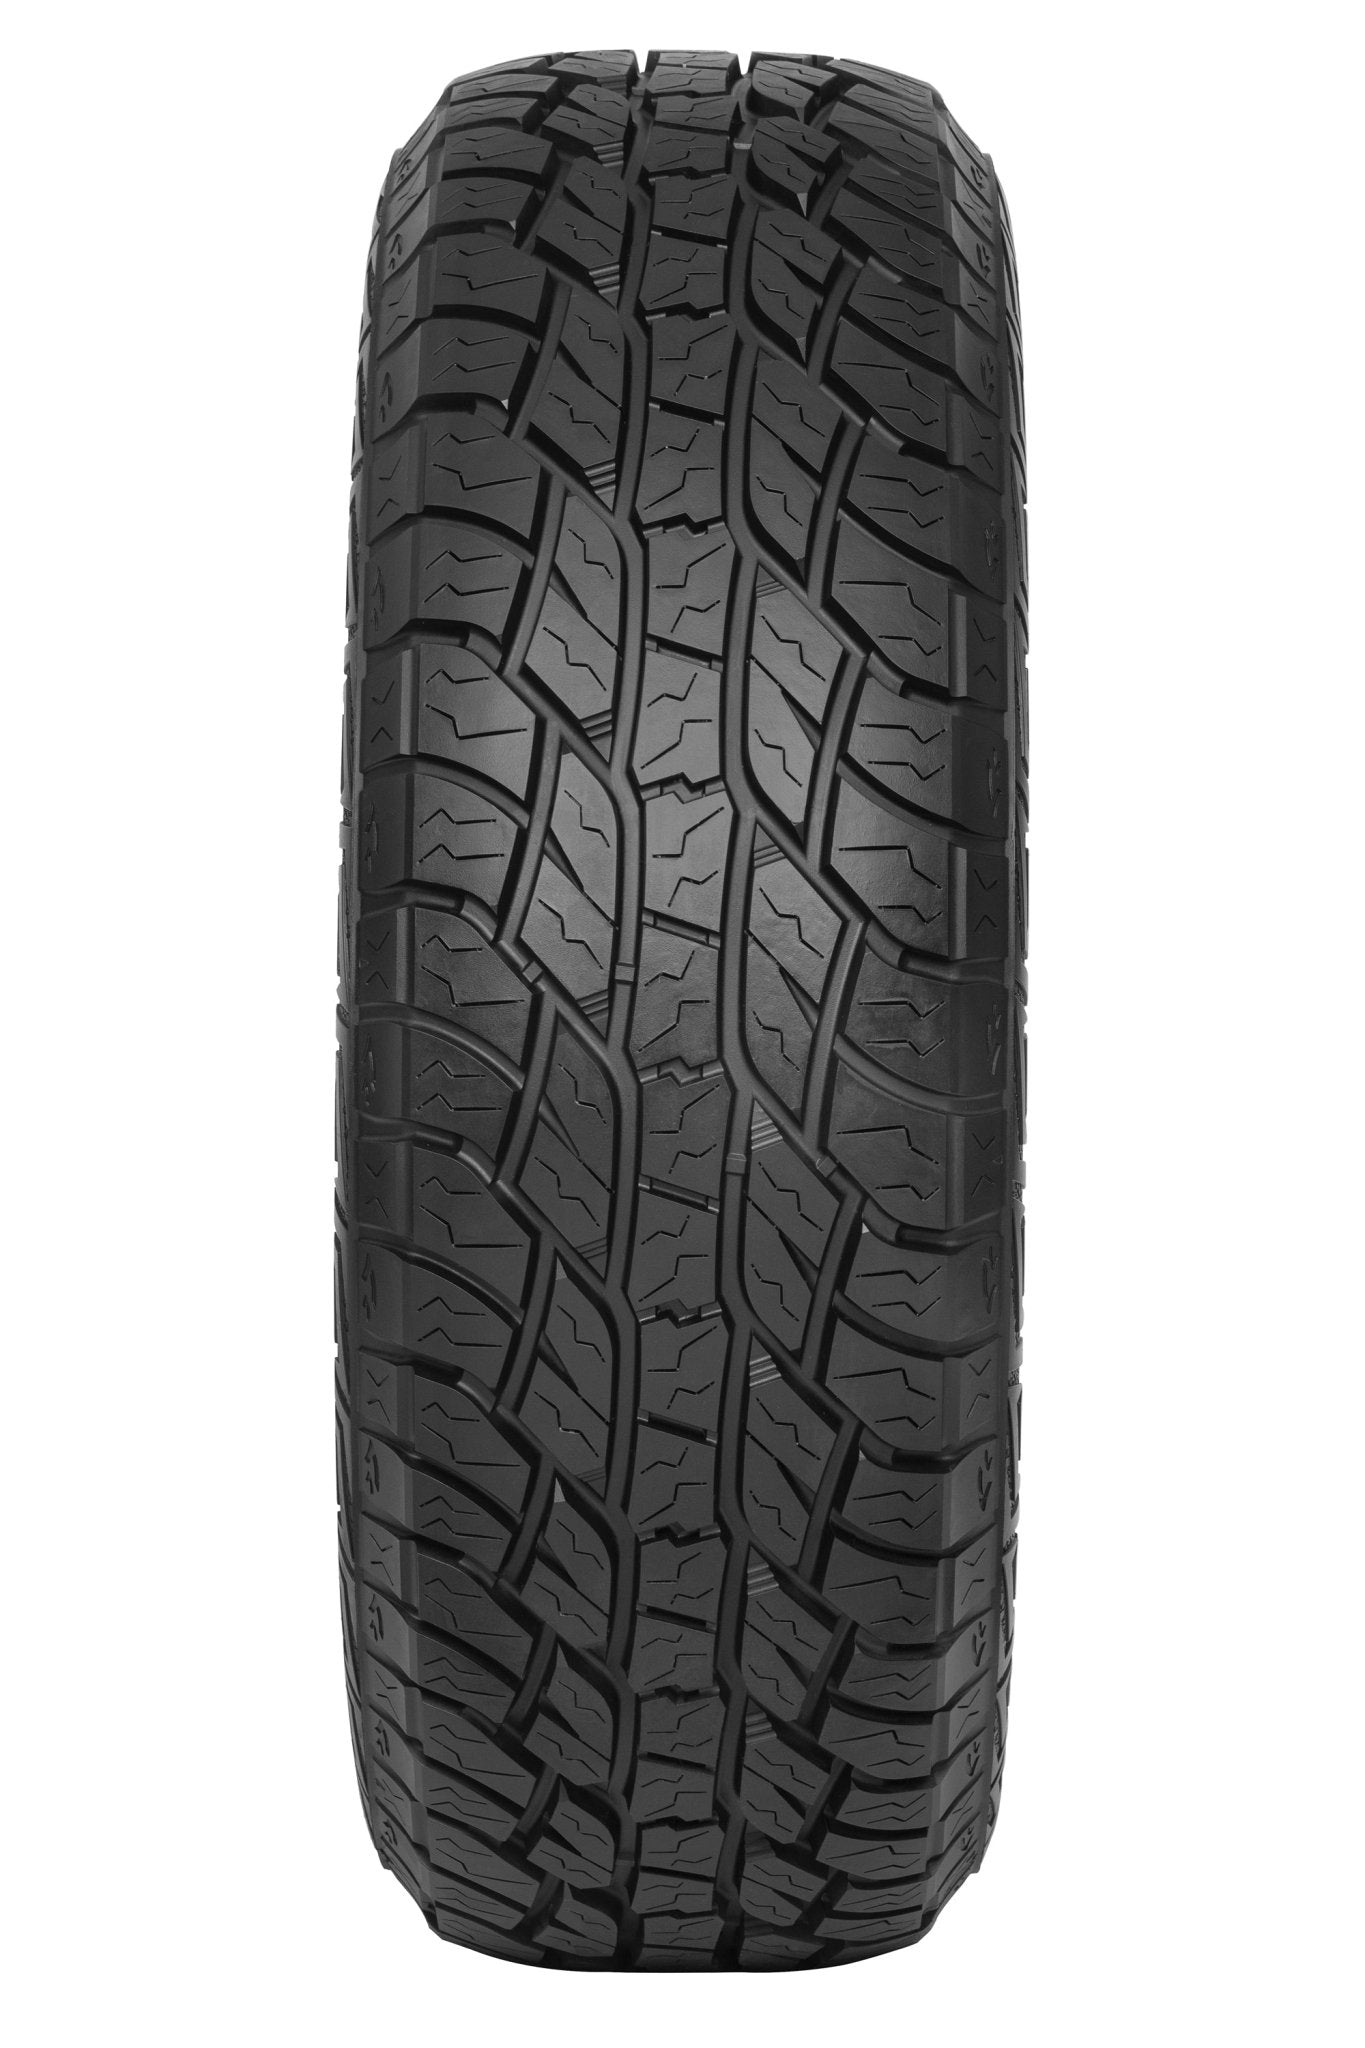 245/70R17 GRENLANDER MAGA A/T TWO LIGHT TRUCK - Toee Tire